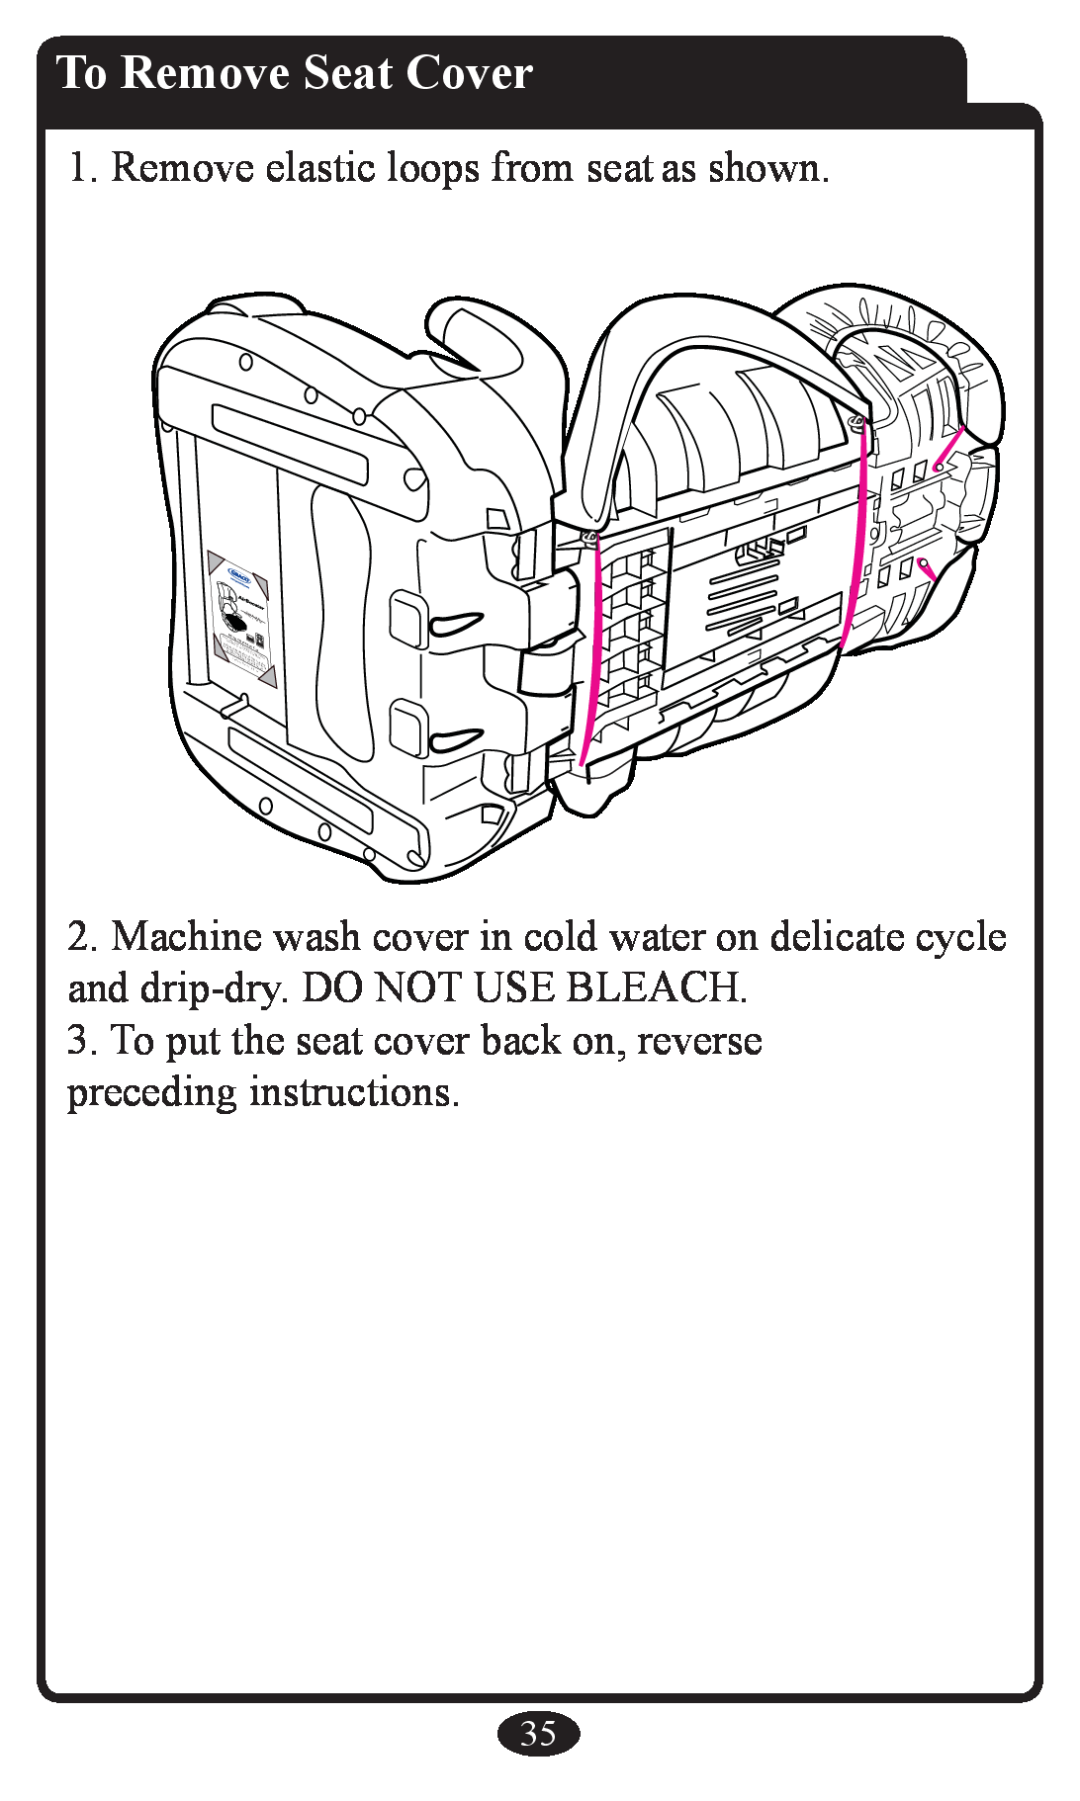 Graco Booster Seat owner manual To Remove Seat Cover, OwBoneosr’tserMaSenatual, Read, This, Manual 